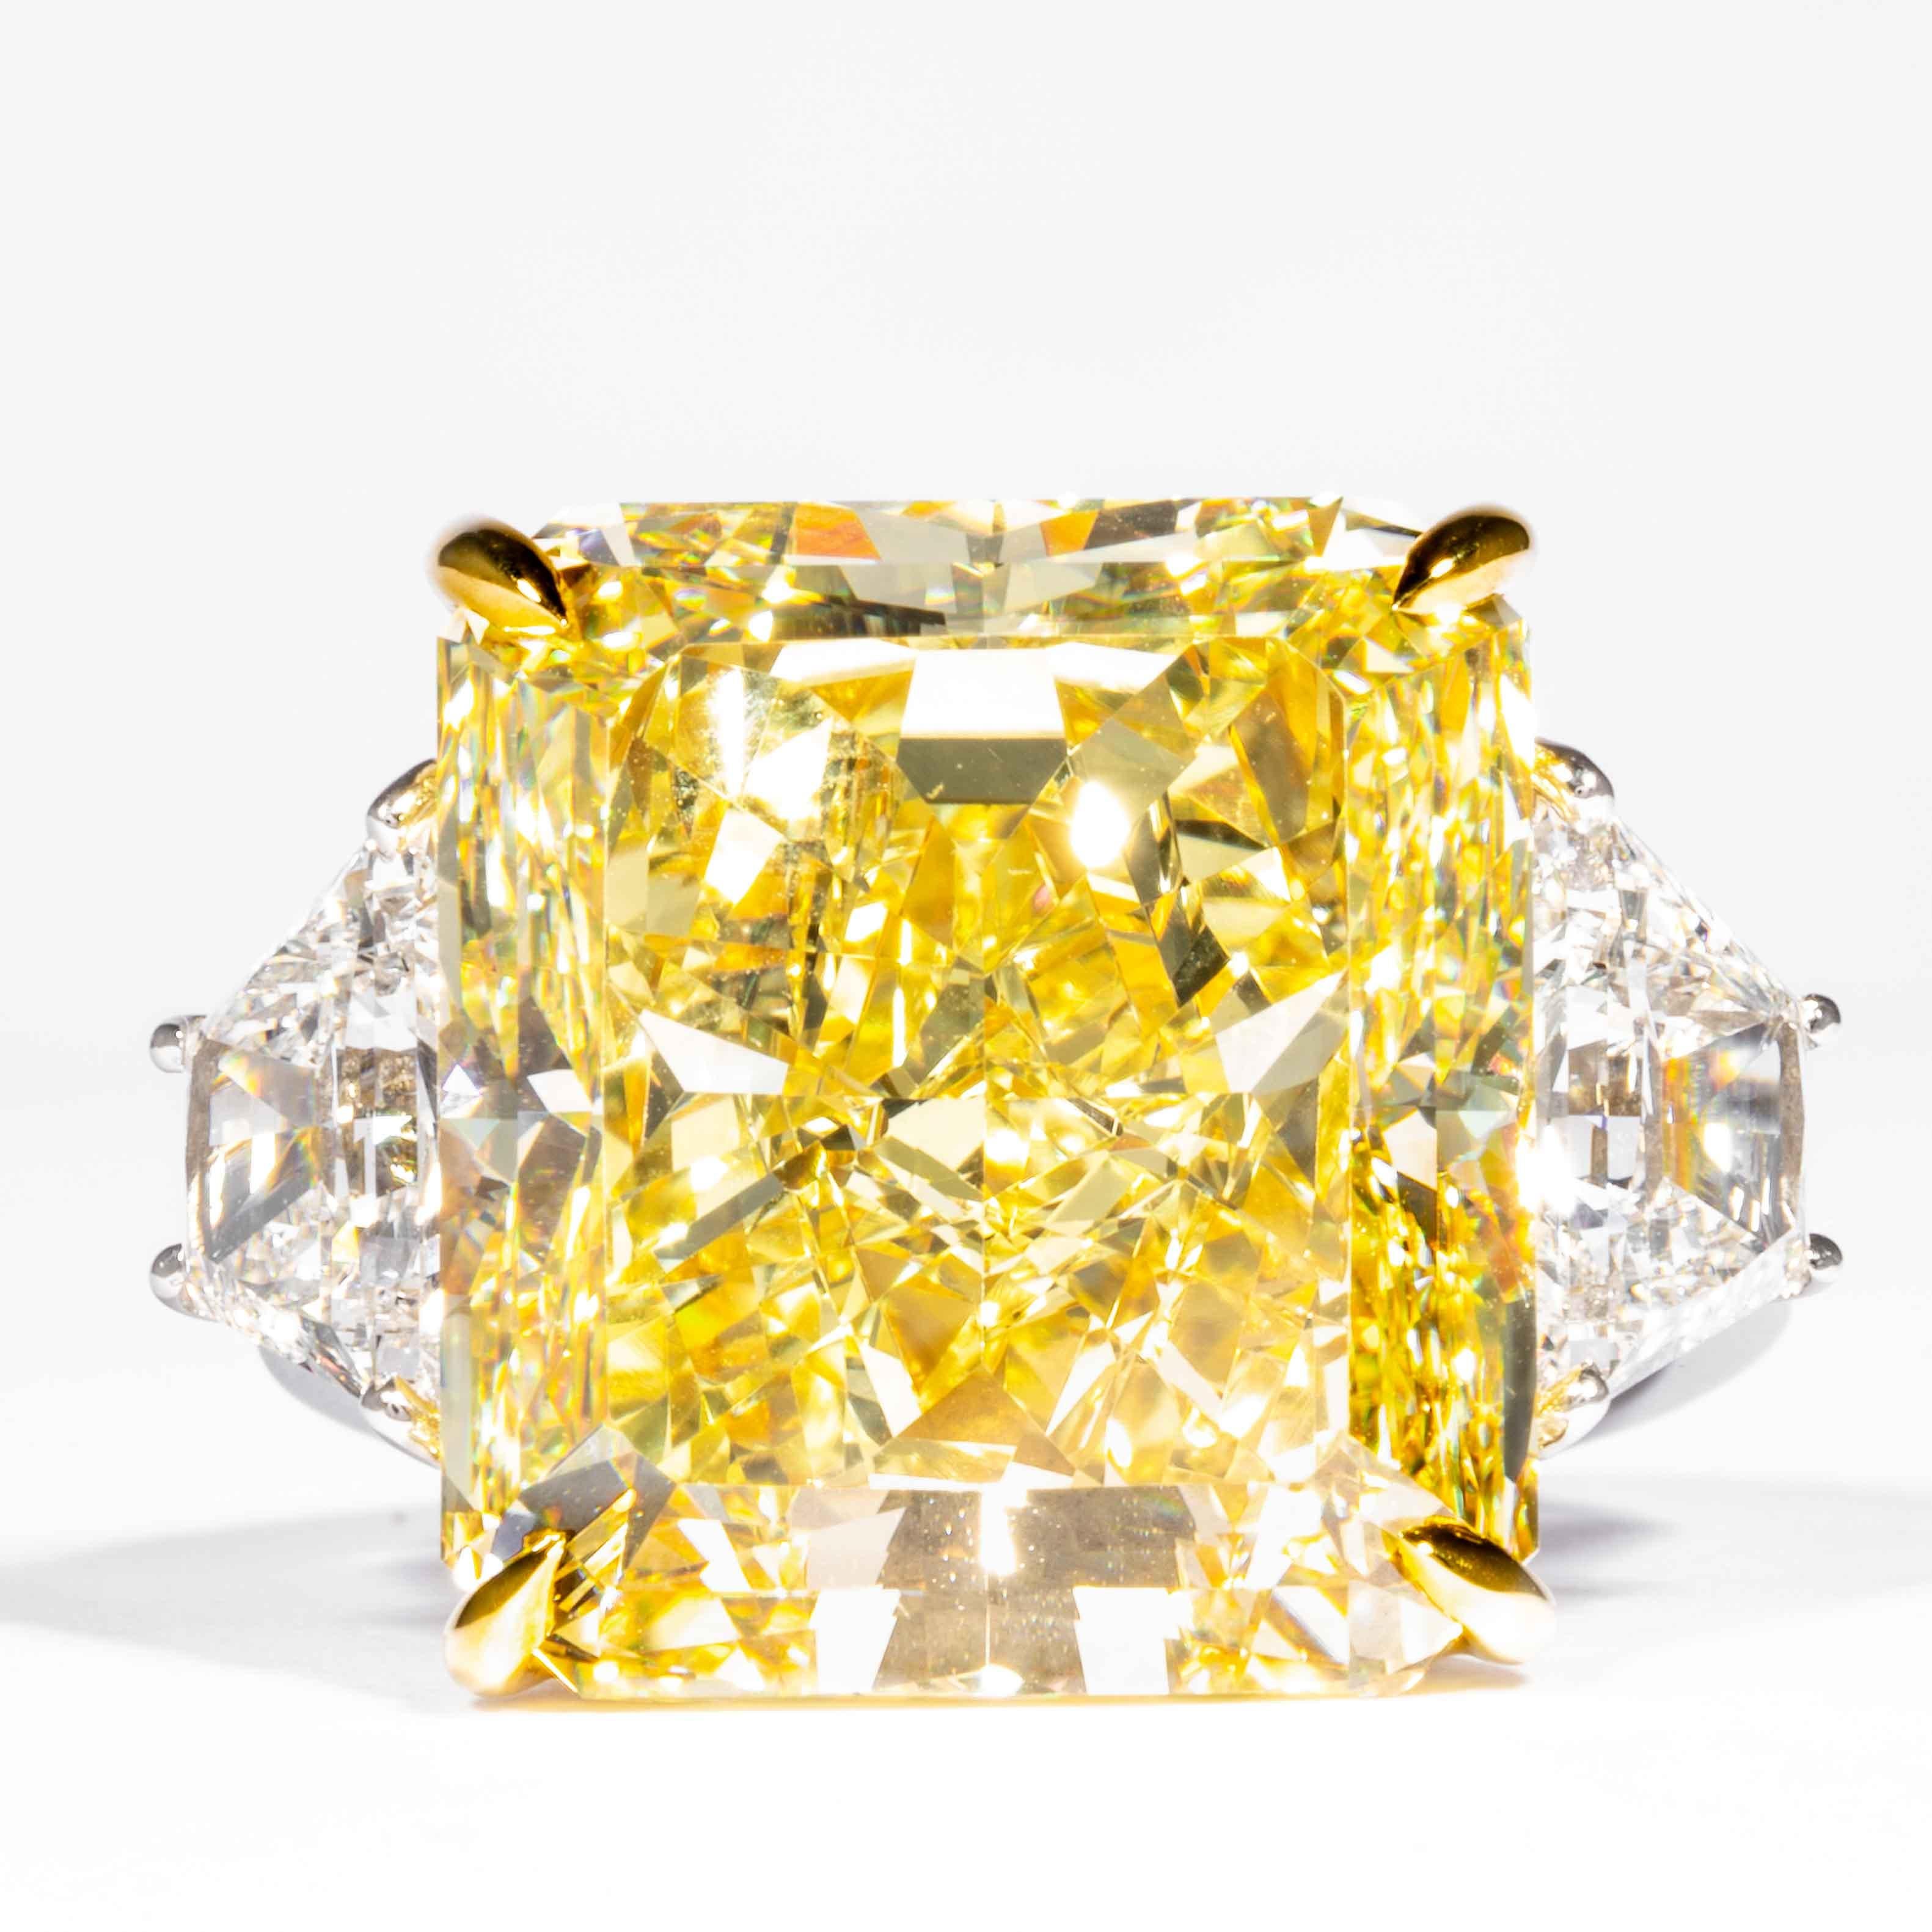 This important and rare fancy yellow radiant diamond is offered by Shreve, Crump & Low. It is custom set in a handcrafted Shreve, Crump & Low Platinum and 18 karat yellow gold 3 stone ring consisting of 1 radiant cut yellow diamond weighing 20.24